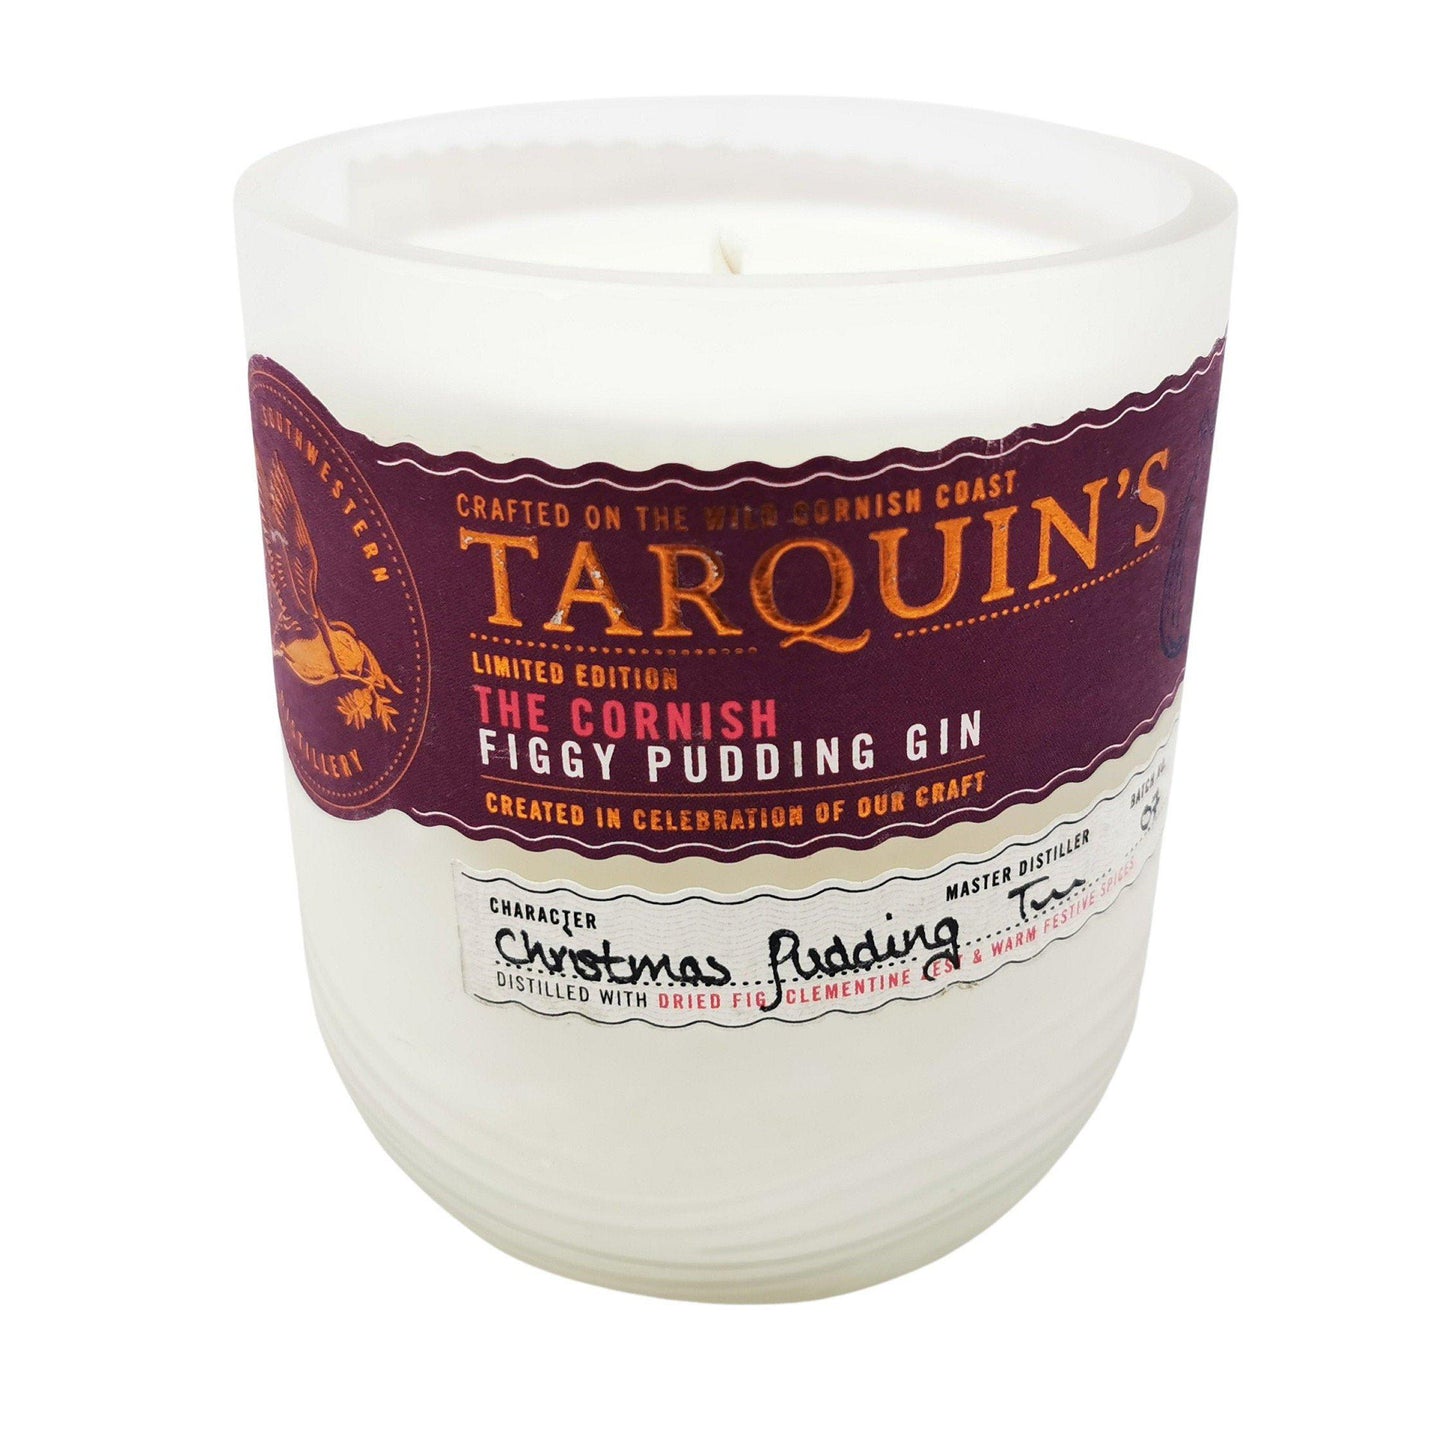 Tarquins Figgy Pudding Gin Bottle Candle-Gin Bottle Candles-Adhock Homeware